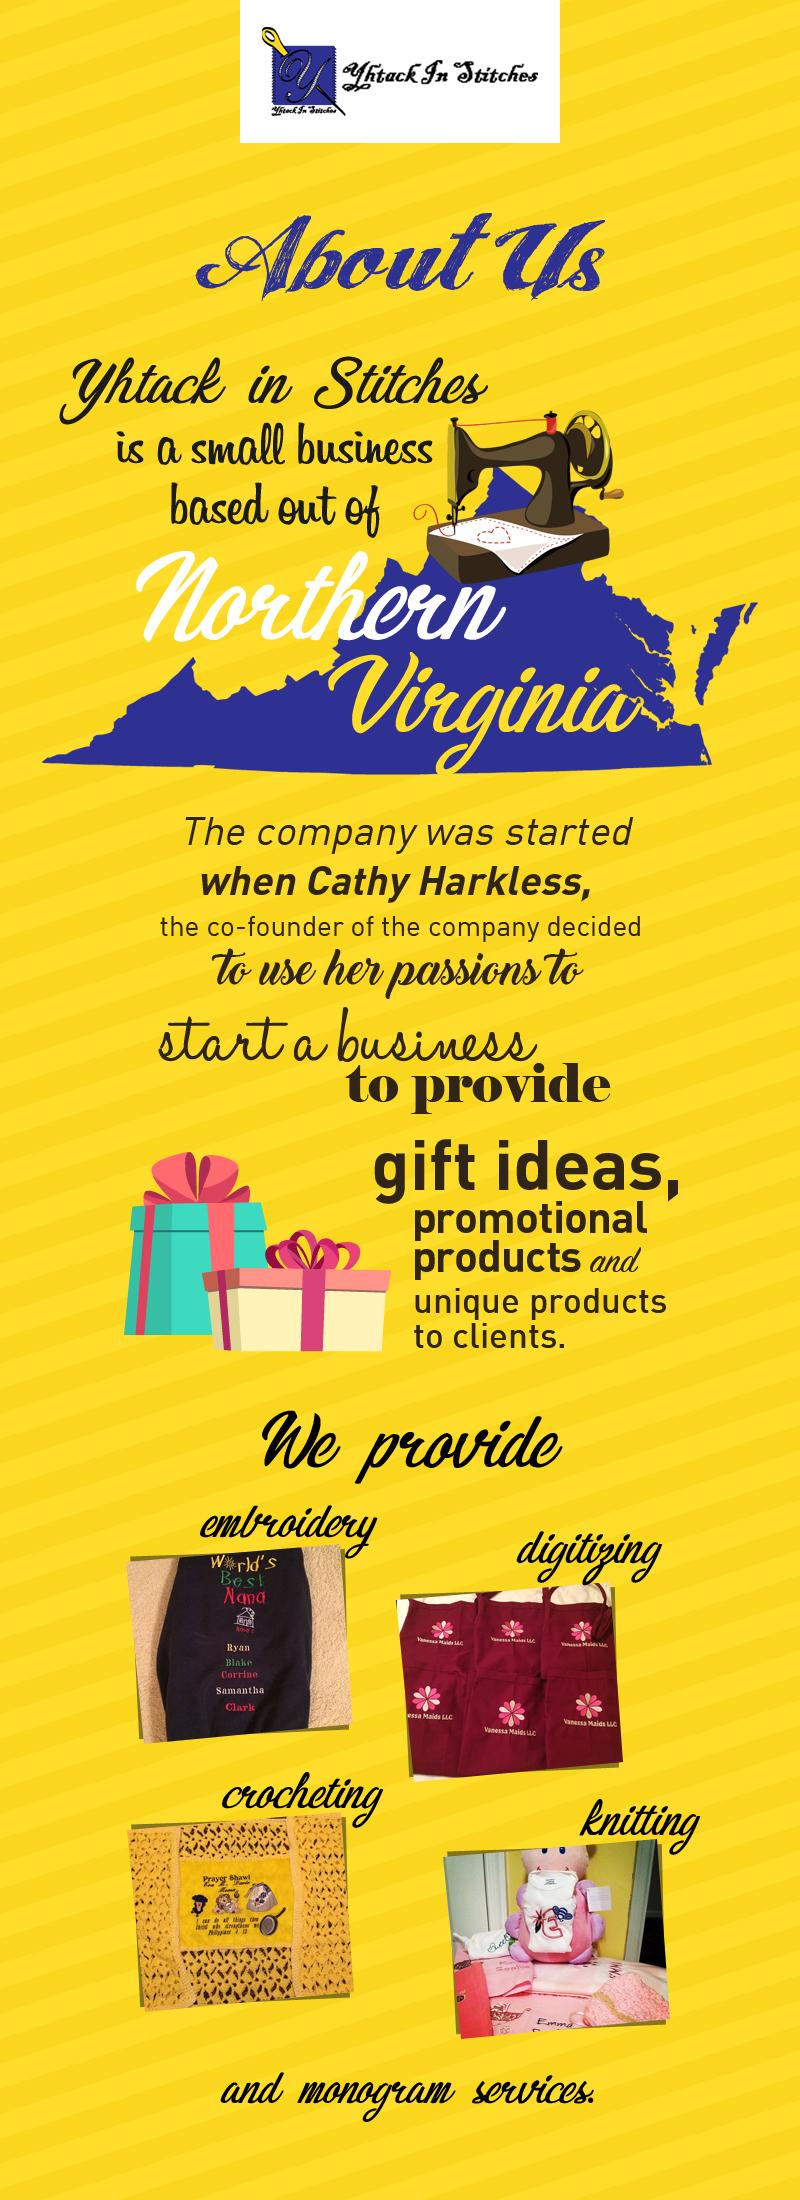 Yhtack in Stitches - A Well Known Embroidery Products Provider in North Virginia